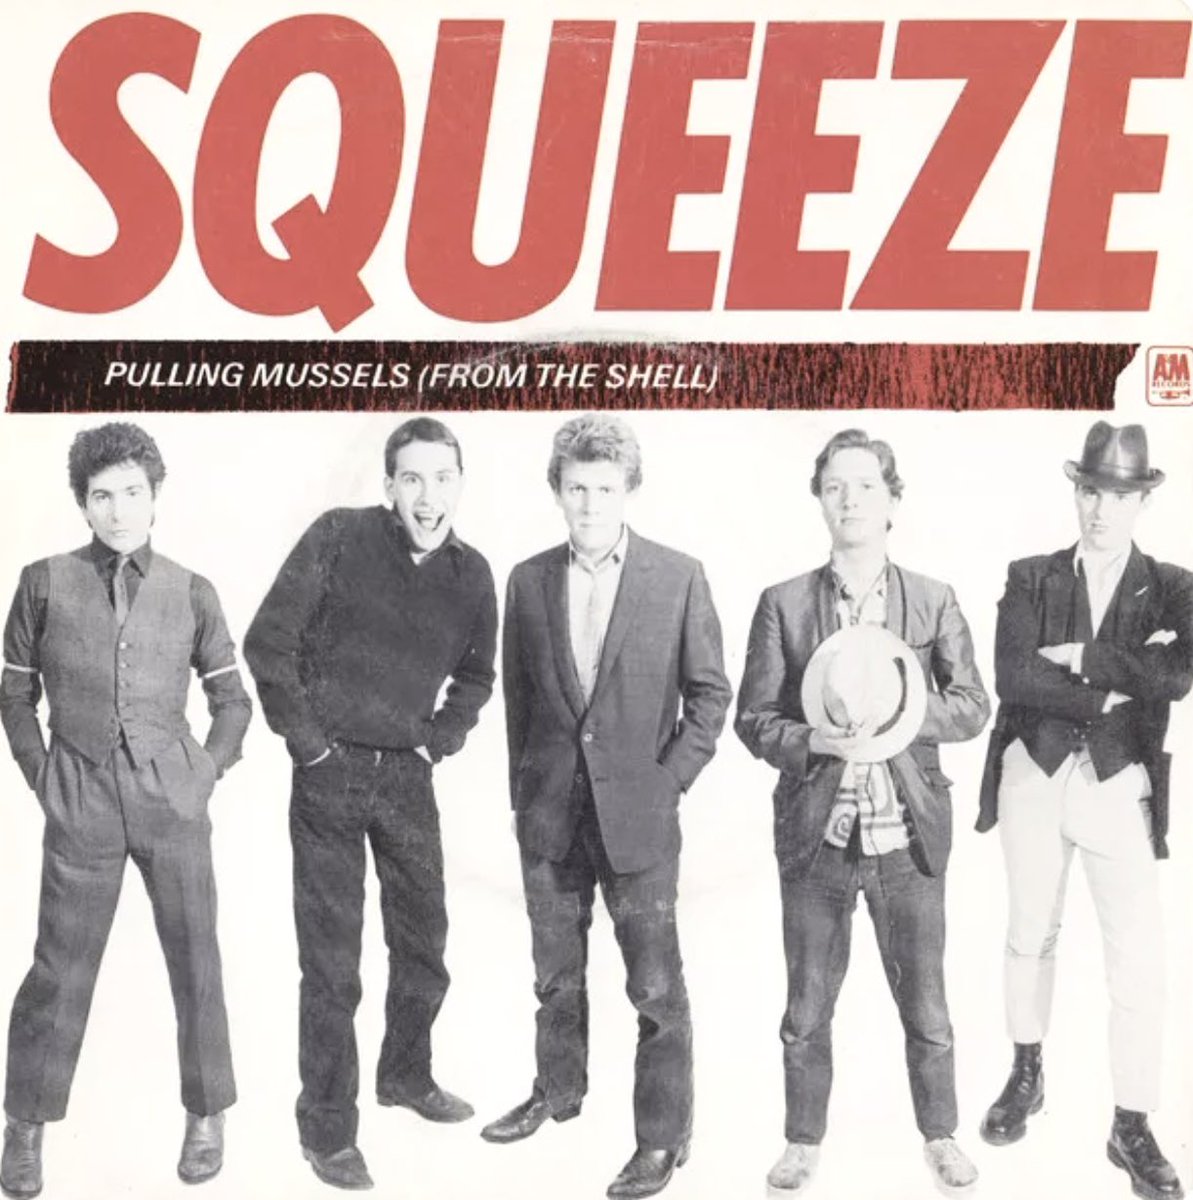 Squeeze Pulling Mussels (From The Shell) 9 May 1980 @NewWaveAndPunk #squeeze #music #songwriters #80s #records #newwave #vinylrecords #vinyl #vinylsingle